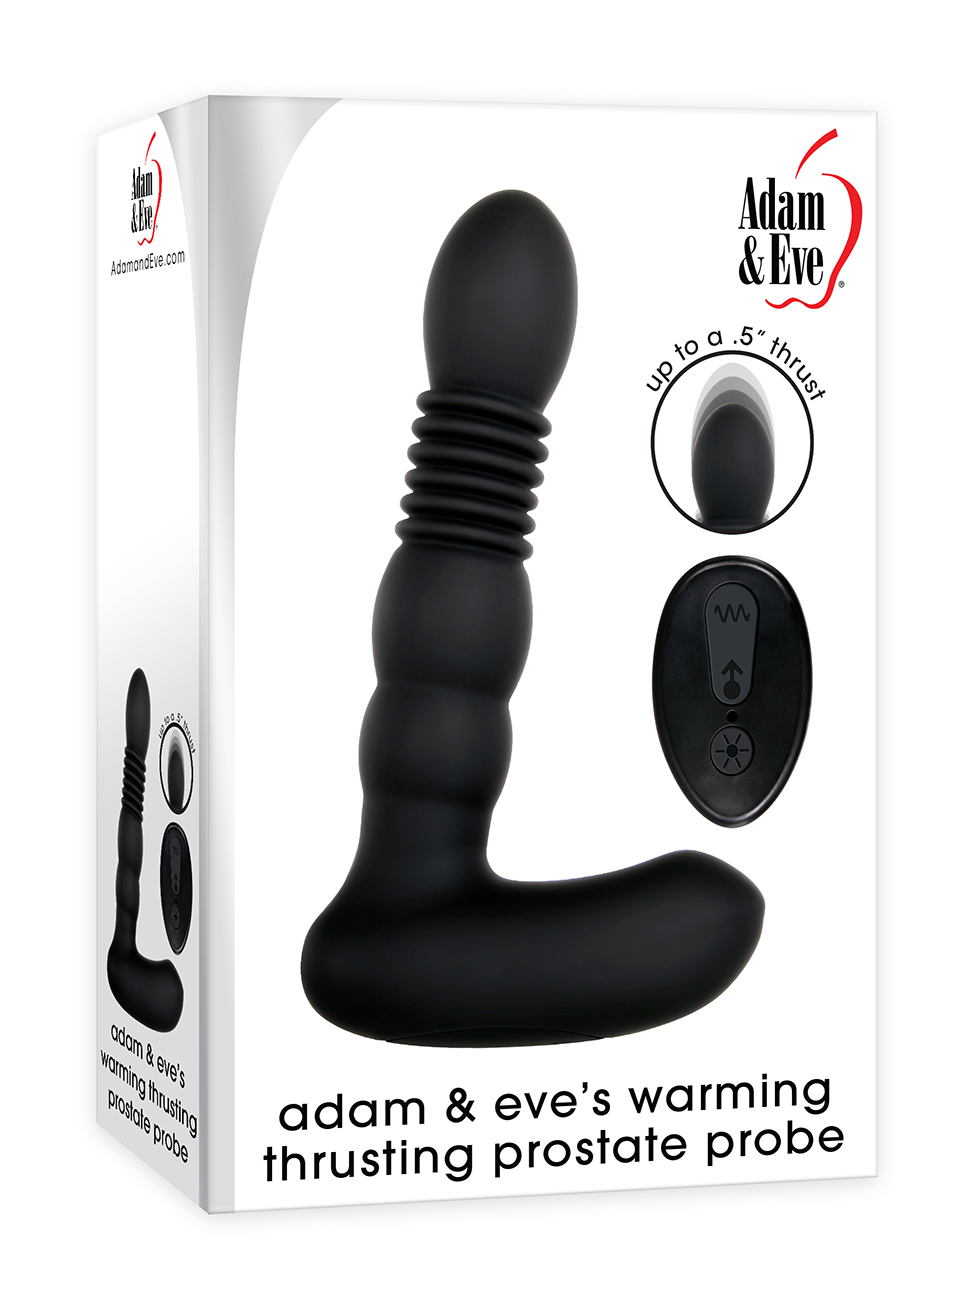 ADAM & EVE'S WARMING AND THRUSTING PROSTATE PROBE